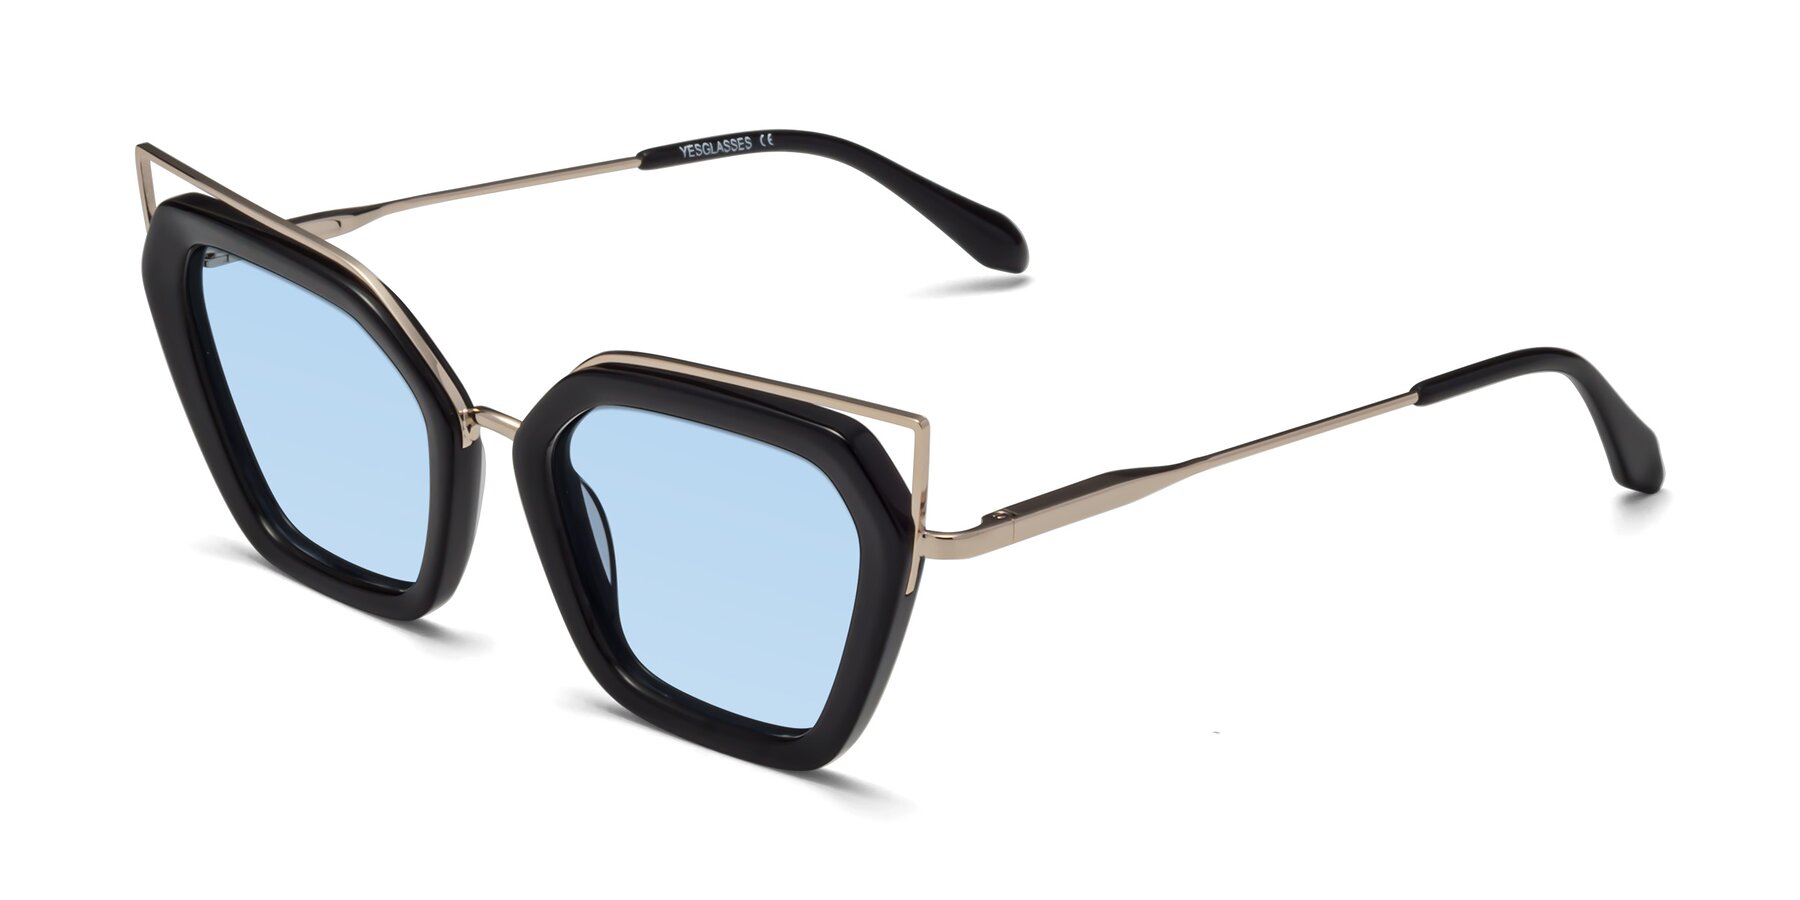 Angle of Delmonte in Black with Light Blue Tinted Lenses